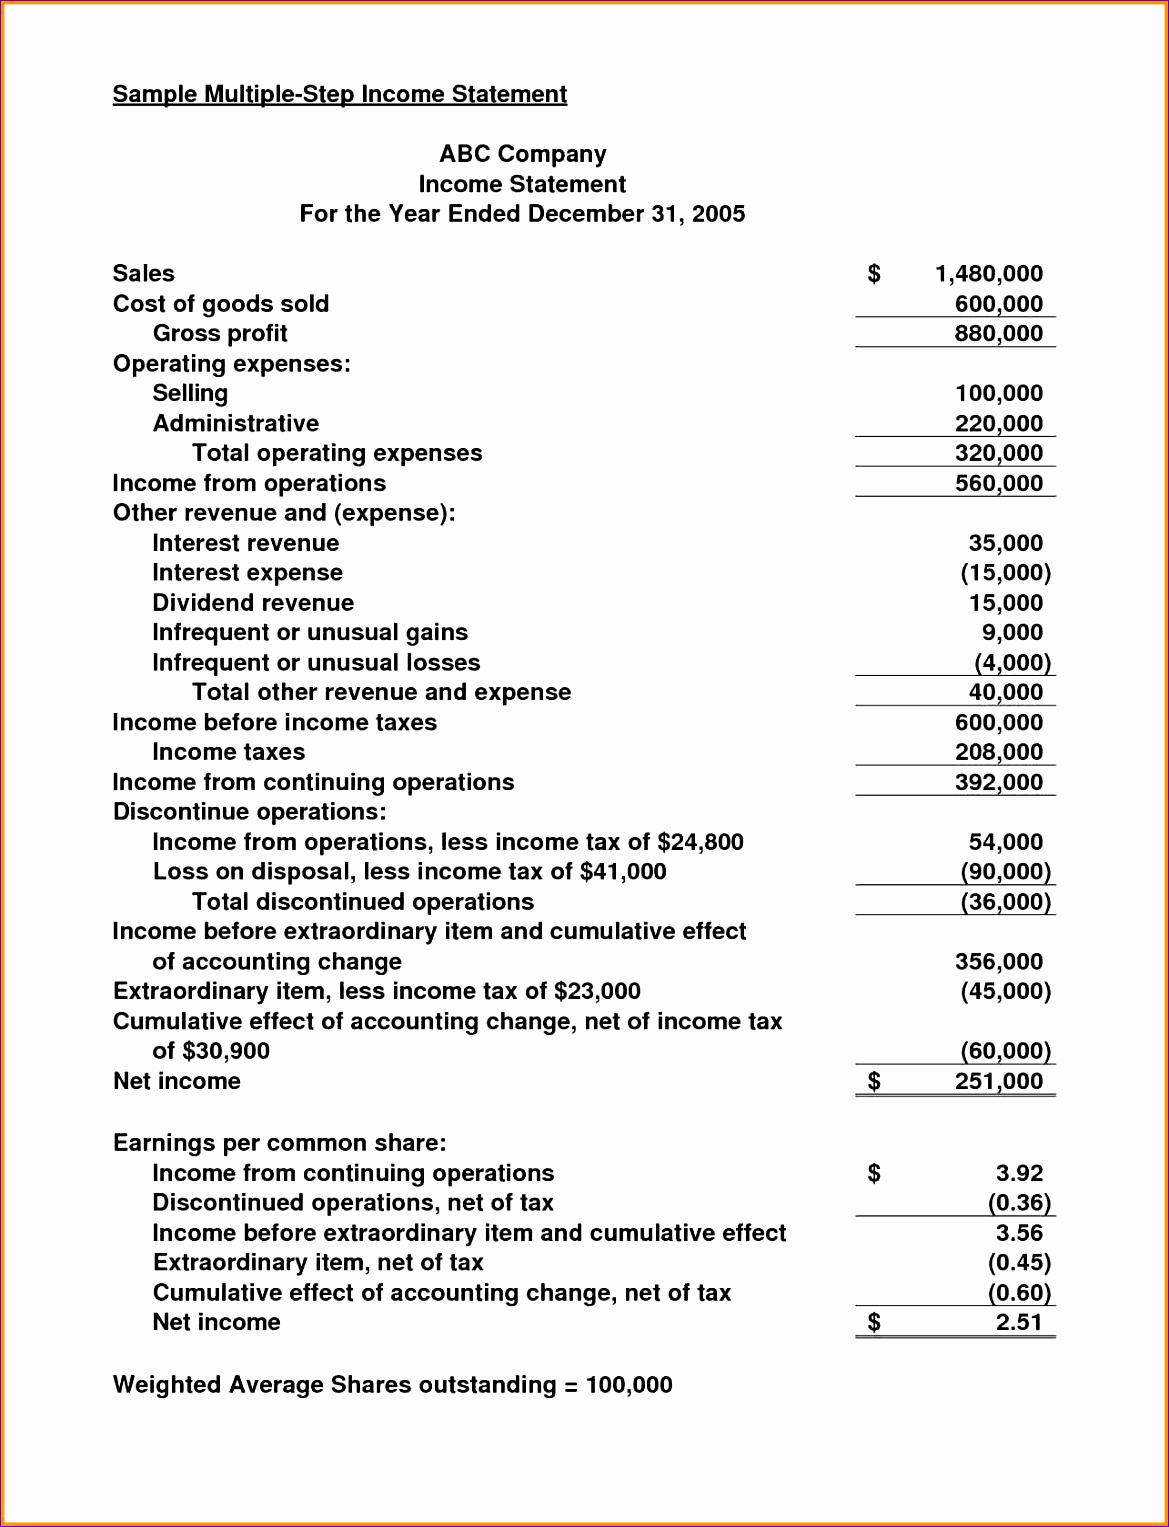 multi step in e statement excel template g1821